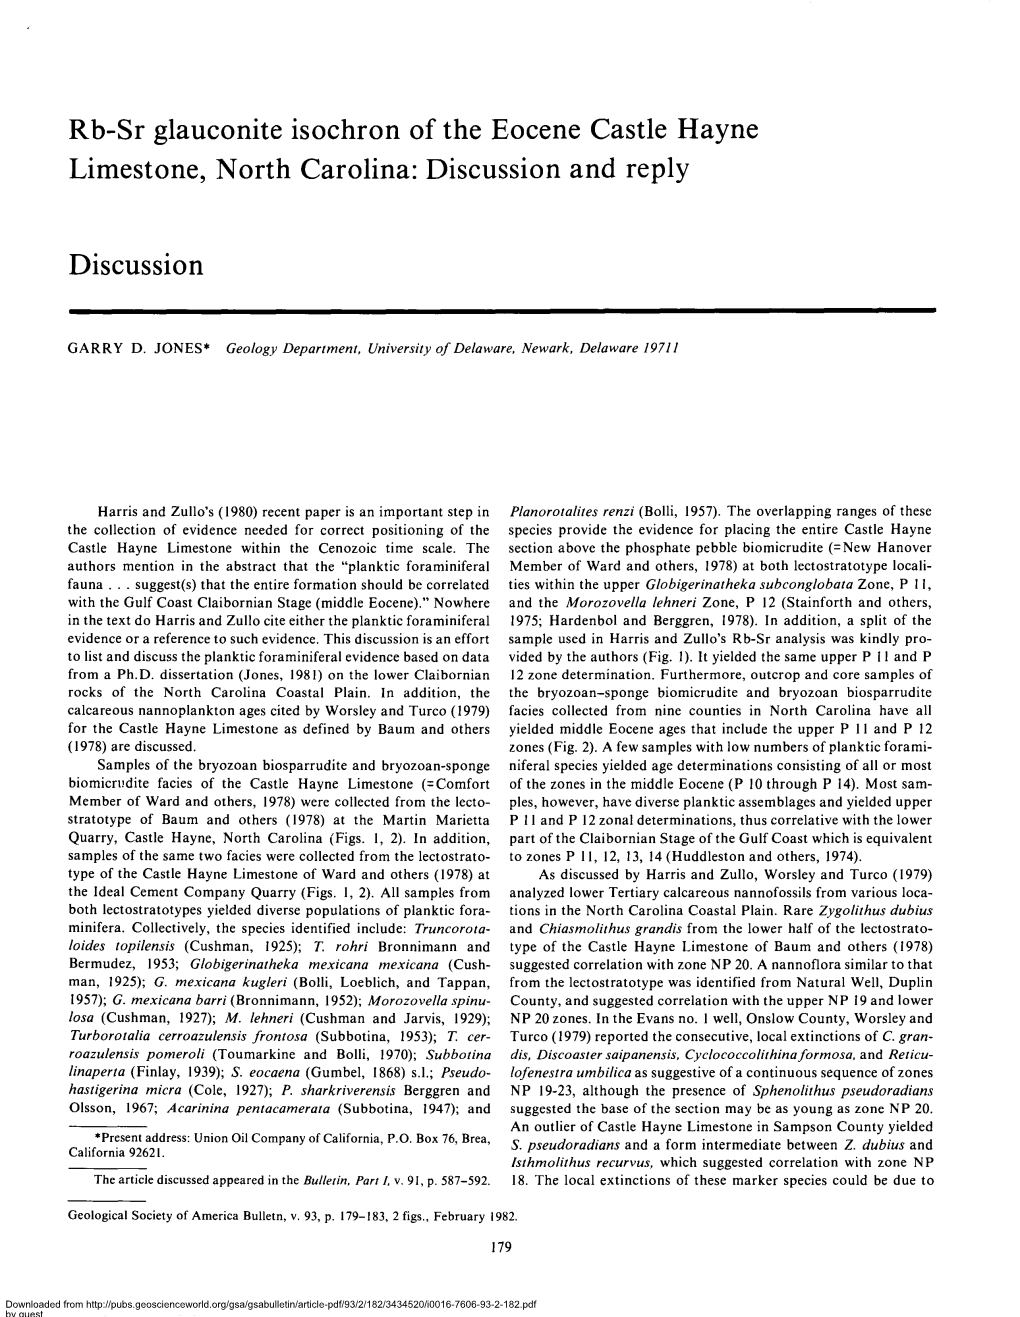 Rb-Sr Glauconite Isochron of the Eocene Castle Hayne Limestone, North Carolina: Discussion and Reply